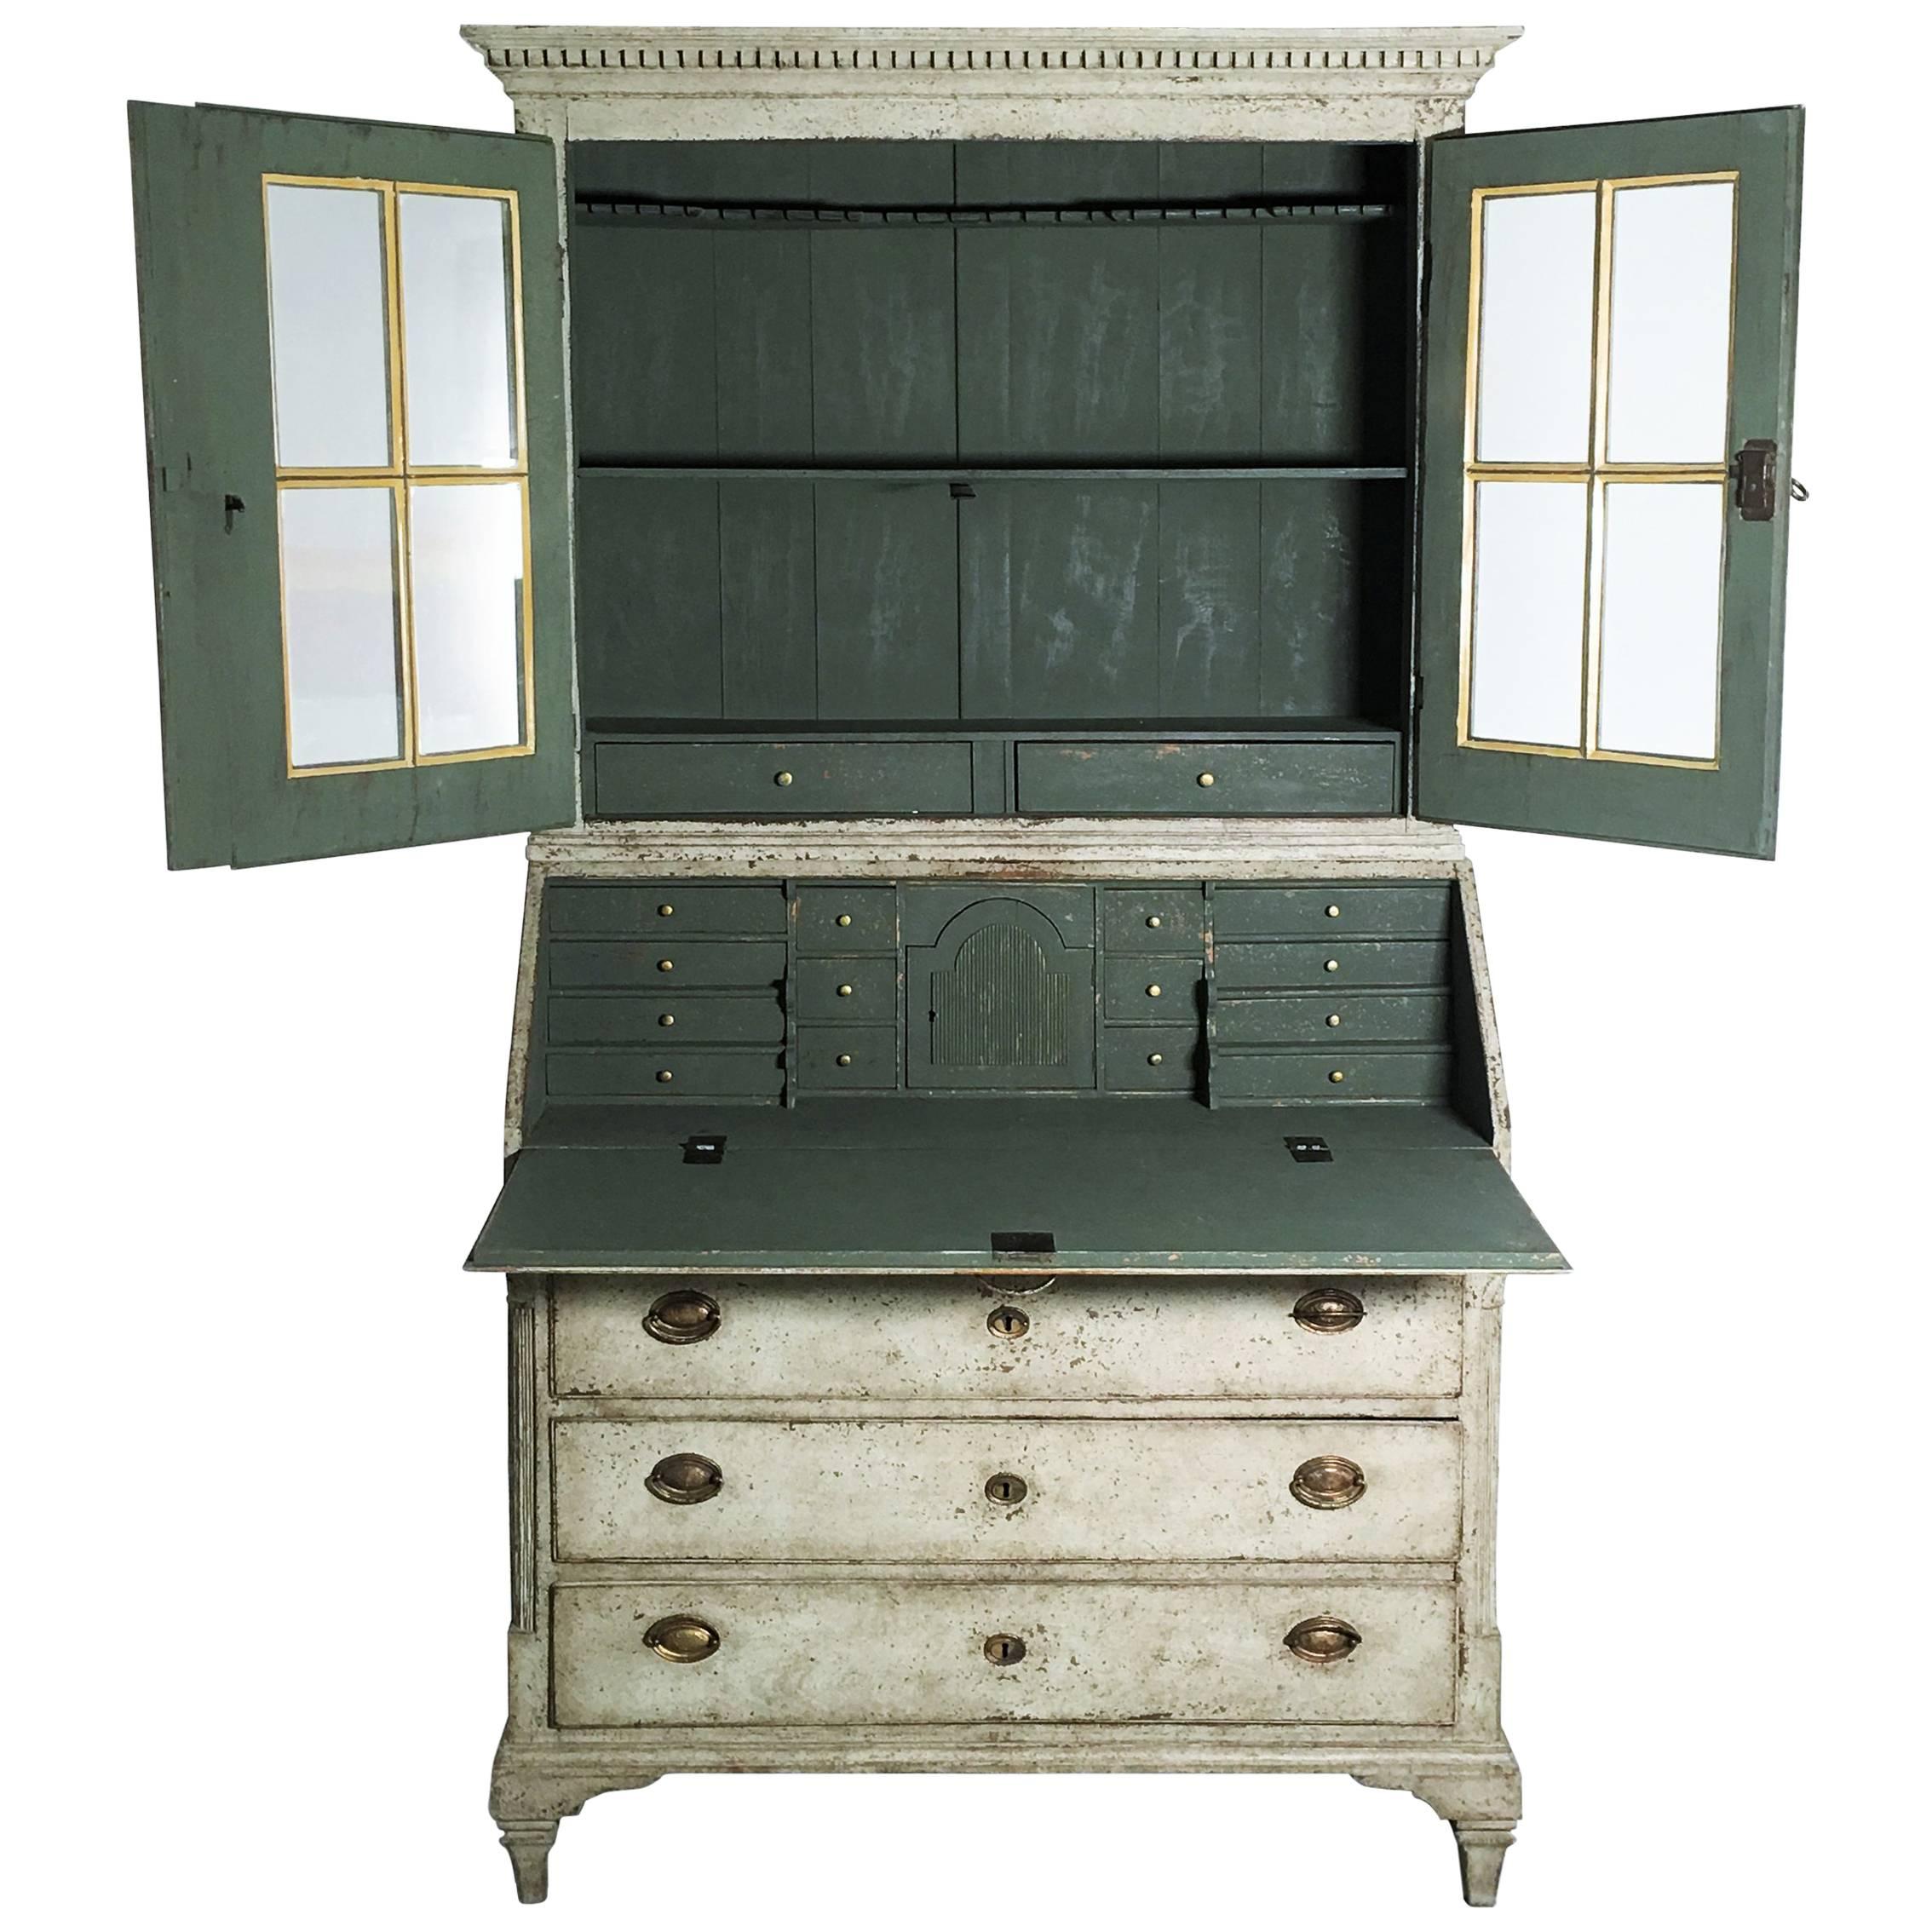 This is a rare and important Swedish Gustavian style painted secretary buffet with original brass hardware and locks, circa 1850. The upper china cabinet section has three shelves, the top shaped and slotted for spoons, behind door fronts carved